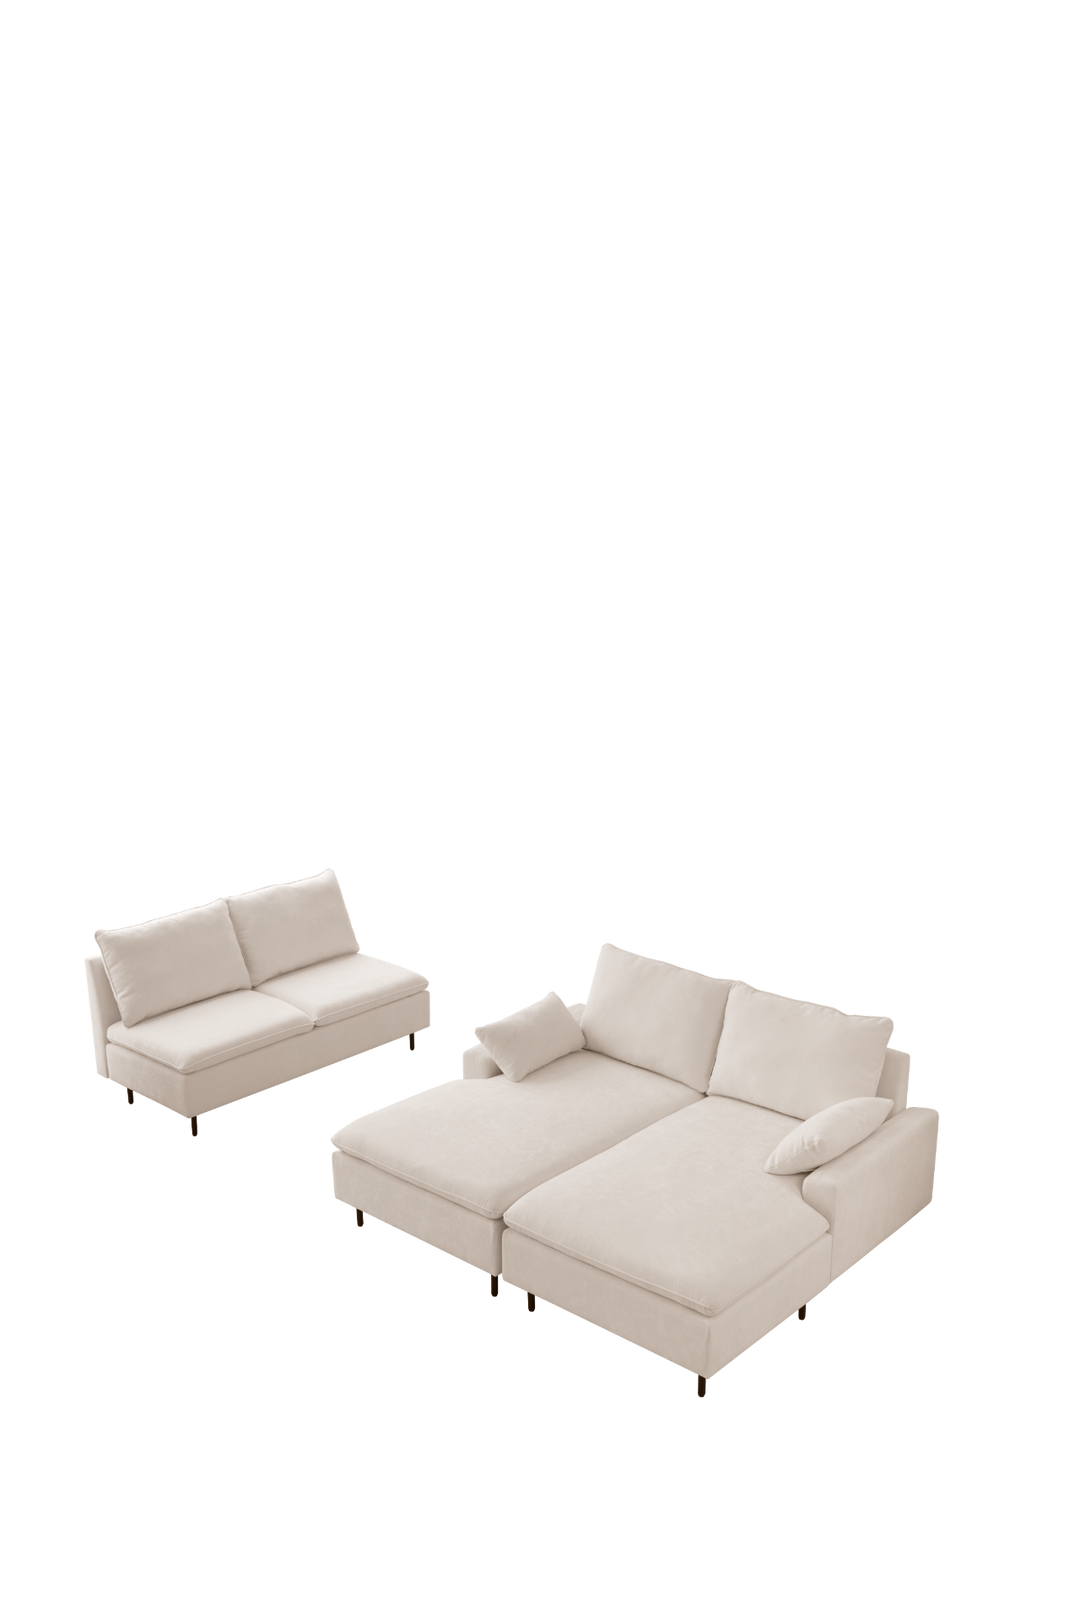 Boho Aesthetic U-Shaped linen sectional sofa with double chaises,Beige | Biophilic Design Airbnb Decor Furniture 